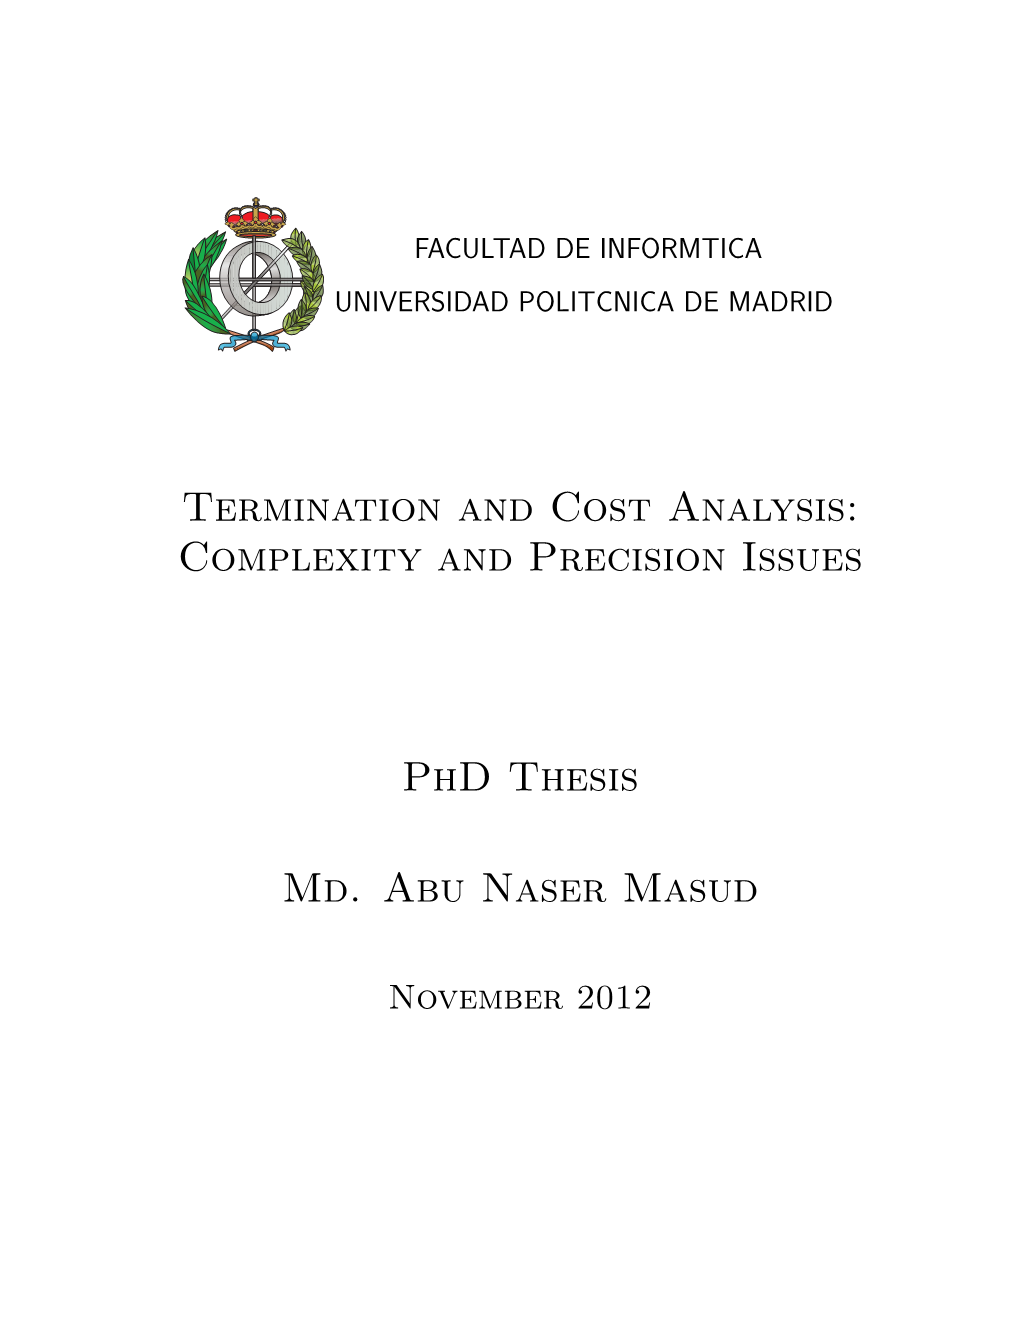 Complexity and Precision Issues Phd Thesis Md. Abu Naser Masud